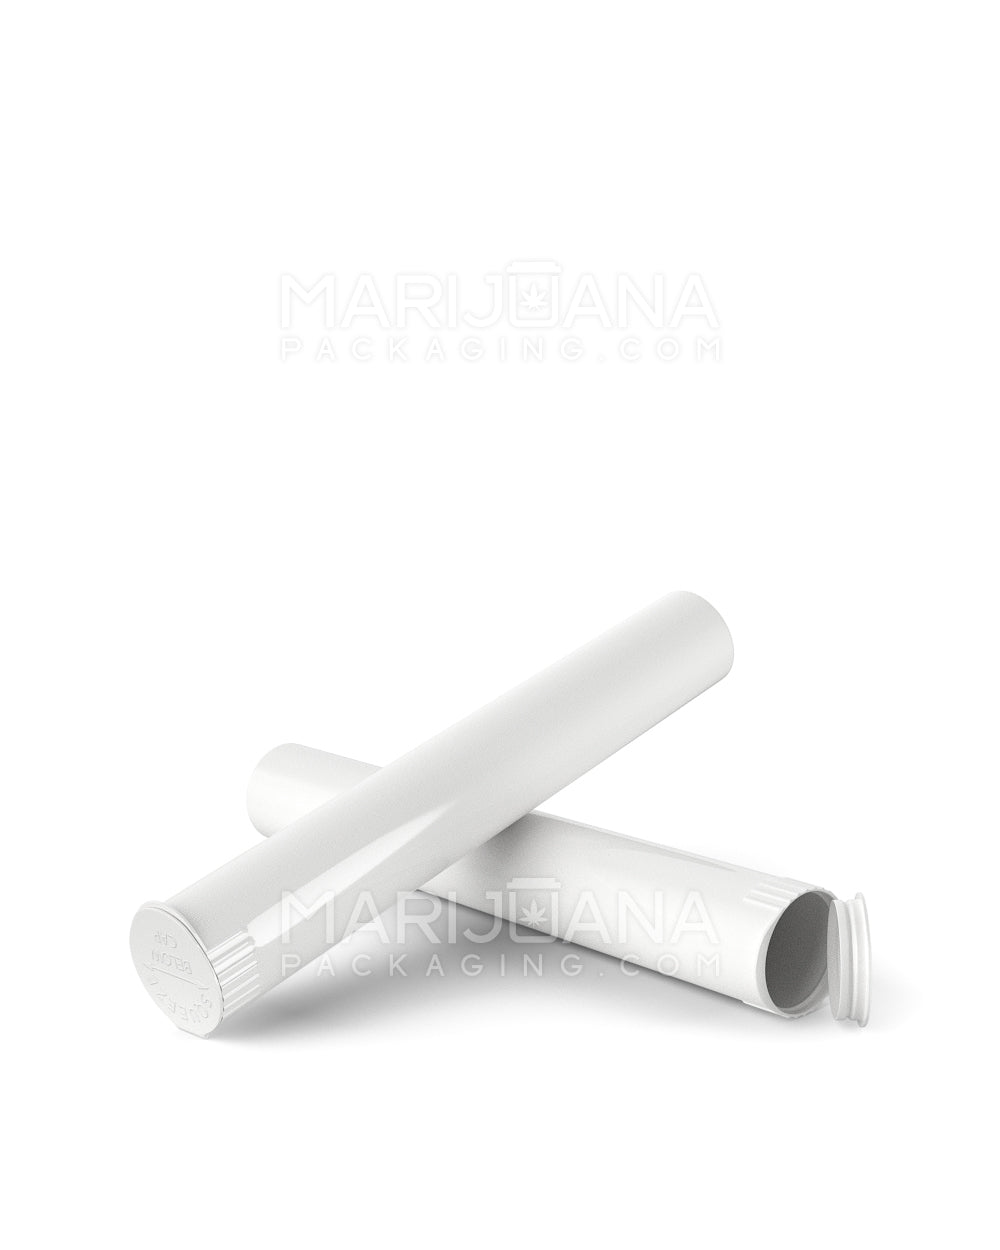 Child Resistant | King Size Pop Top Opaque Plastic PCR Pre-Roll Tubes (Open) | 116mm - White - 1000 Count - 8